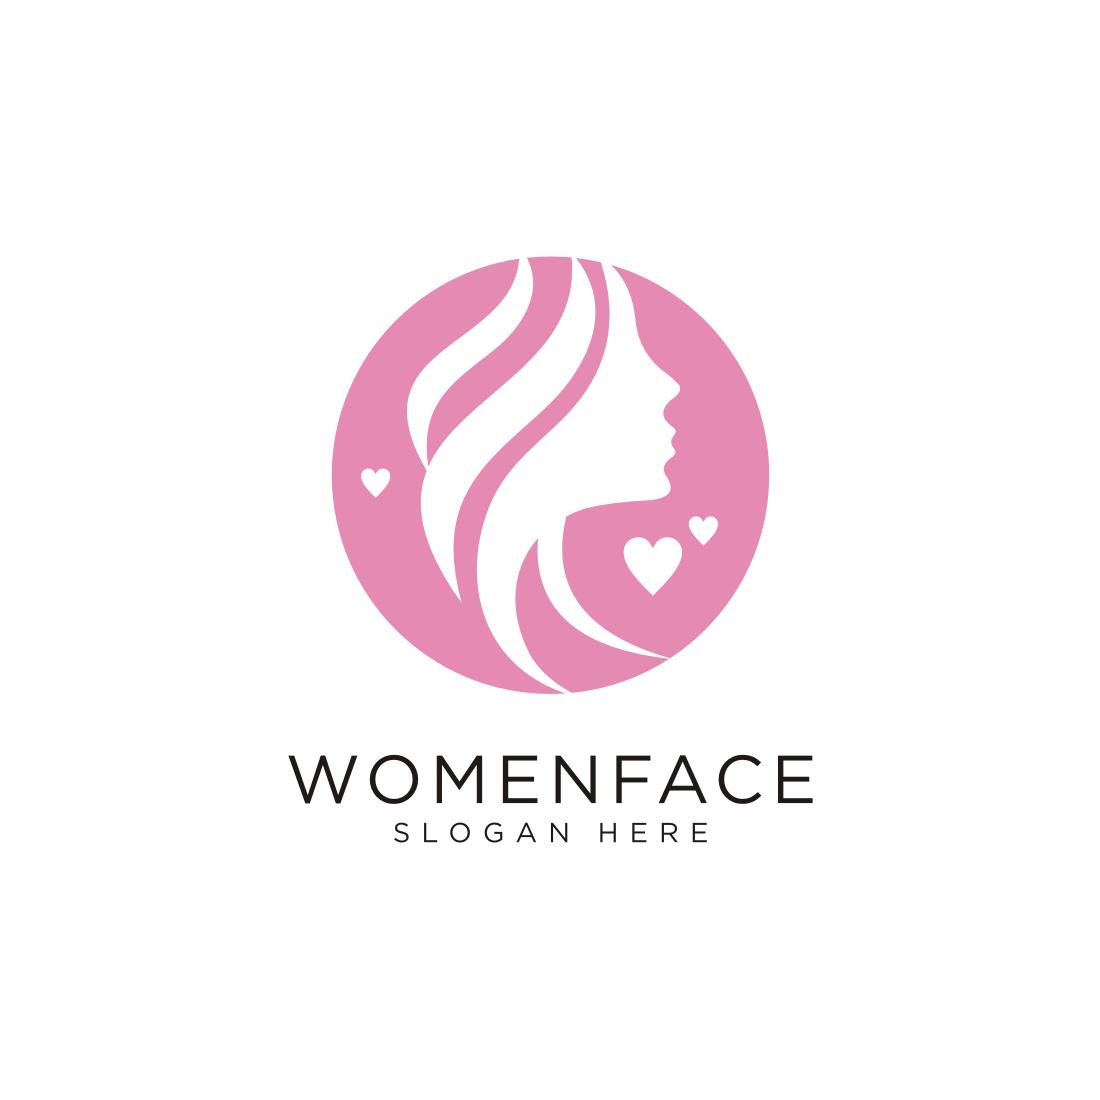 Image Details IST_25129_09286 - Vector of beautiful woman face logo, women  icon on white background